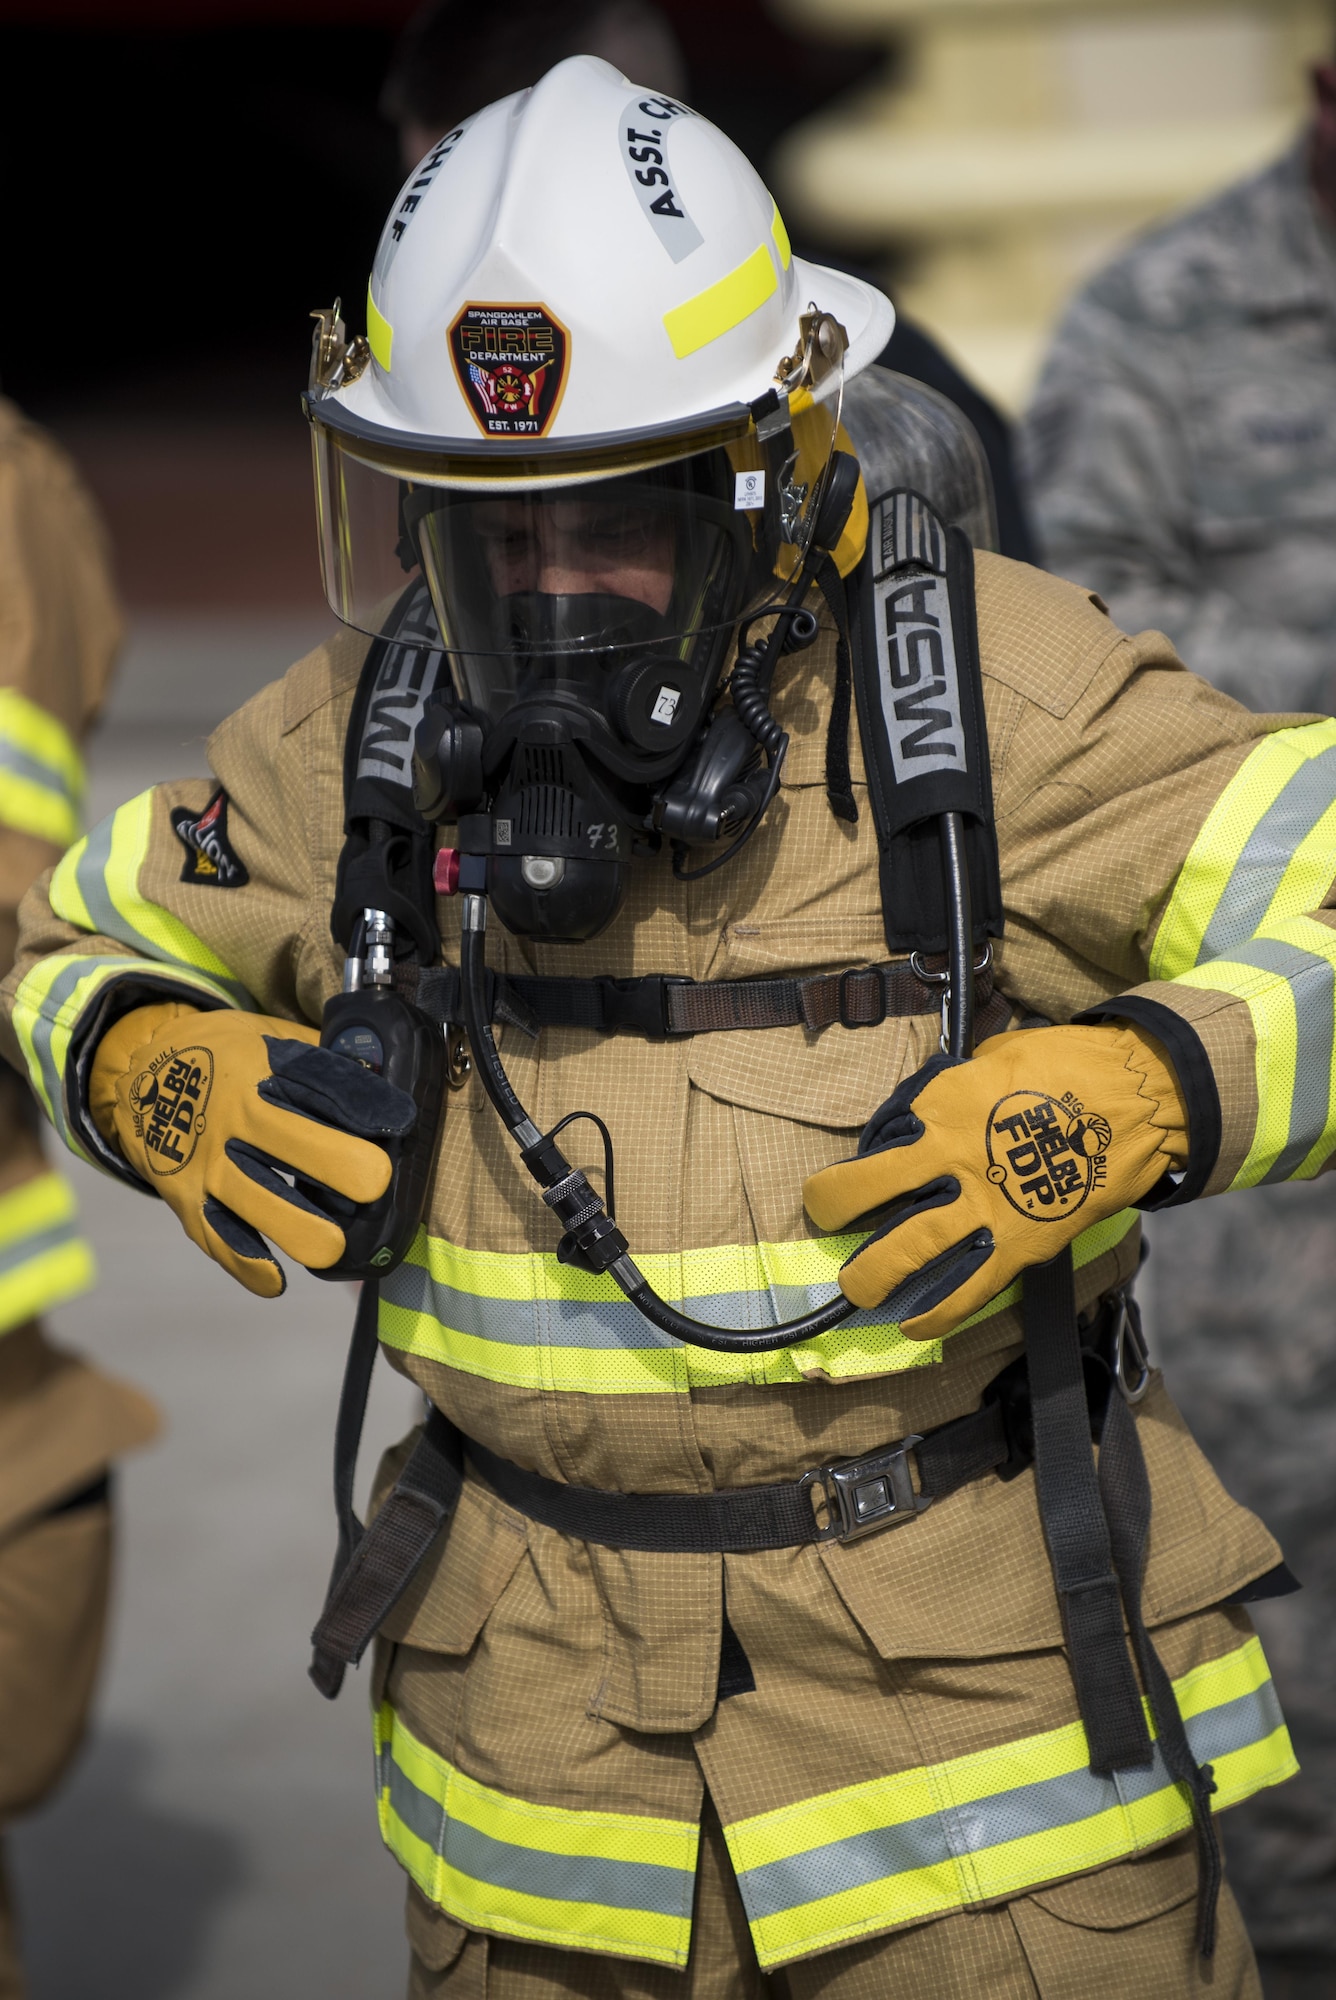 U.S. Air Force Col. Steven Zubowicz, 52nd Mission Support Group commander, makes adjustments to his fire suit before a live fire exercise at Spangdahlem Air Base, Germany, March 23, 2017. MSG leaders were invited to the exercise where firefighters practiced extinguishing various types of fires in a three-room training trailer. (U.S. Air Force photo by Airman 1st Class Preston Cherry)